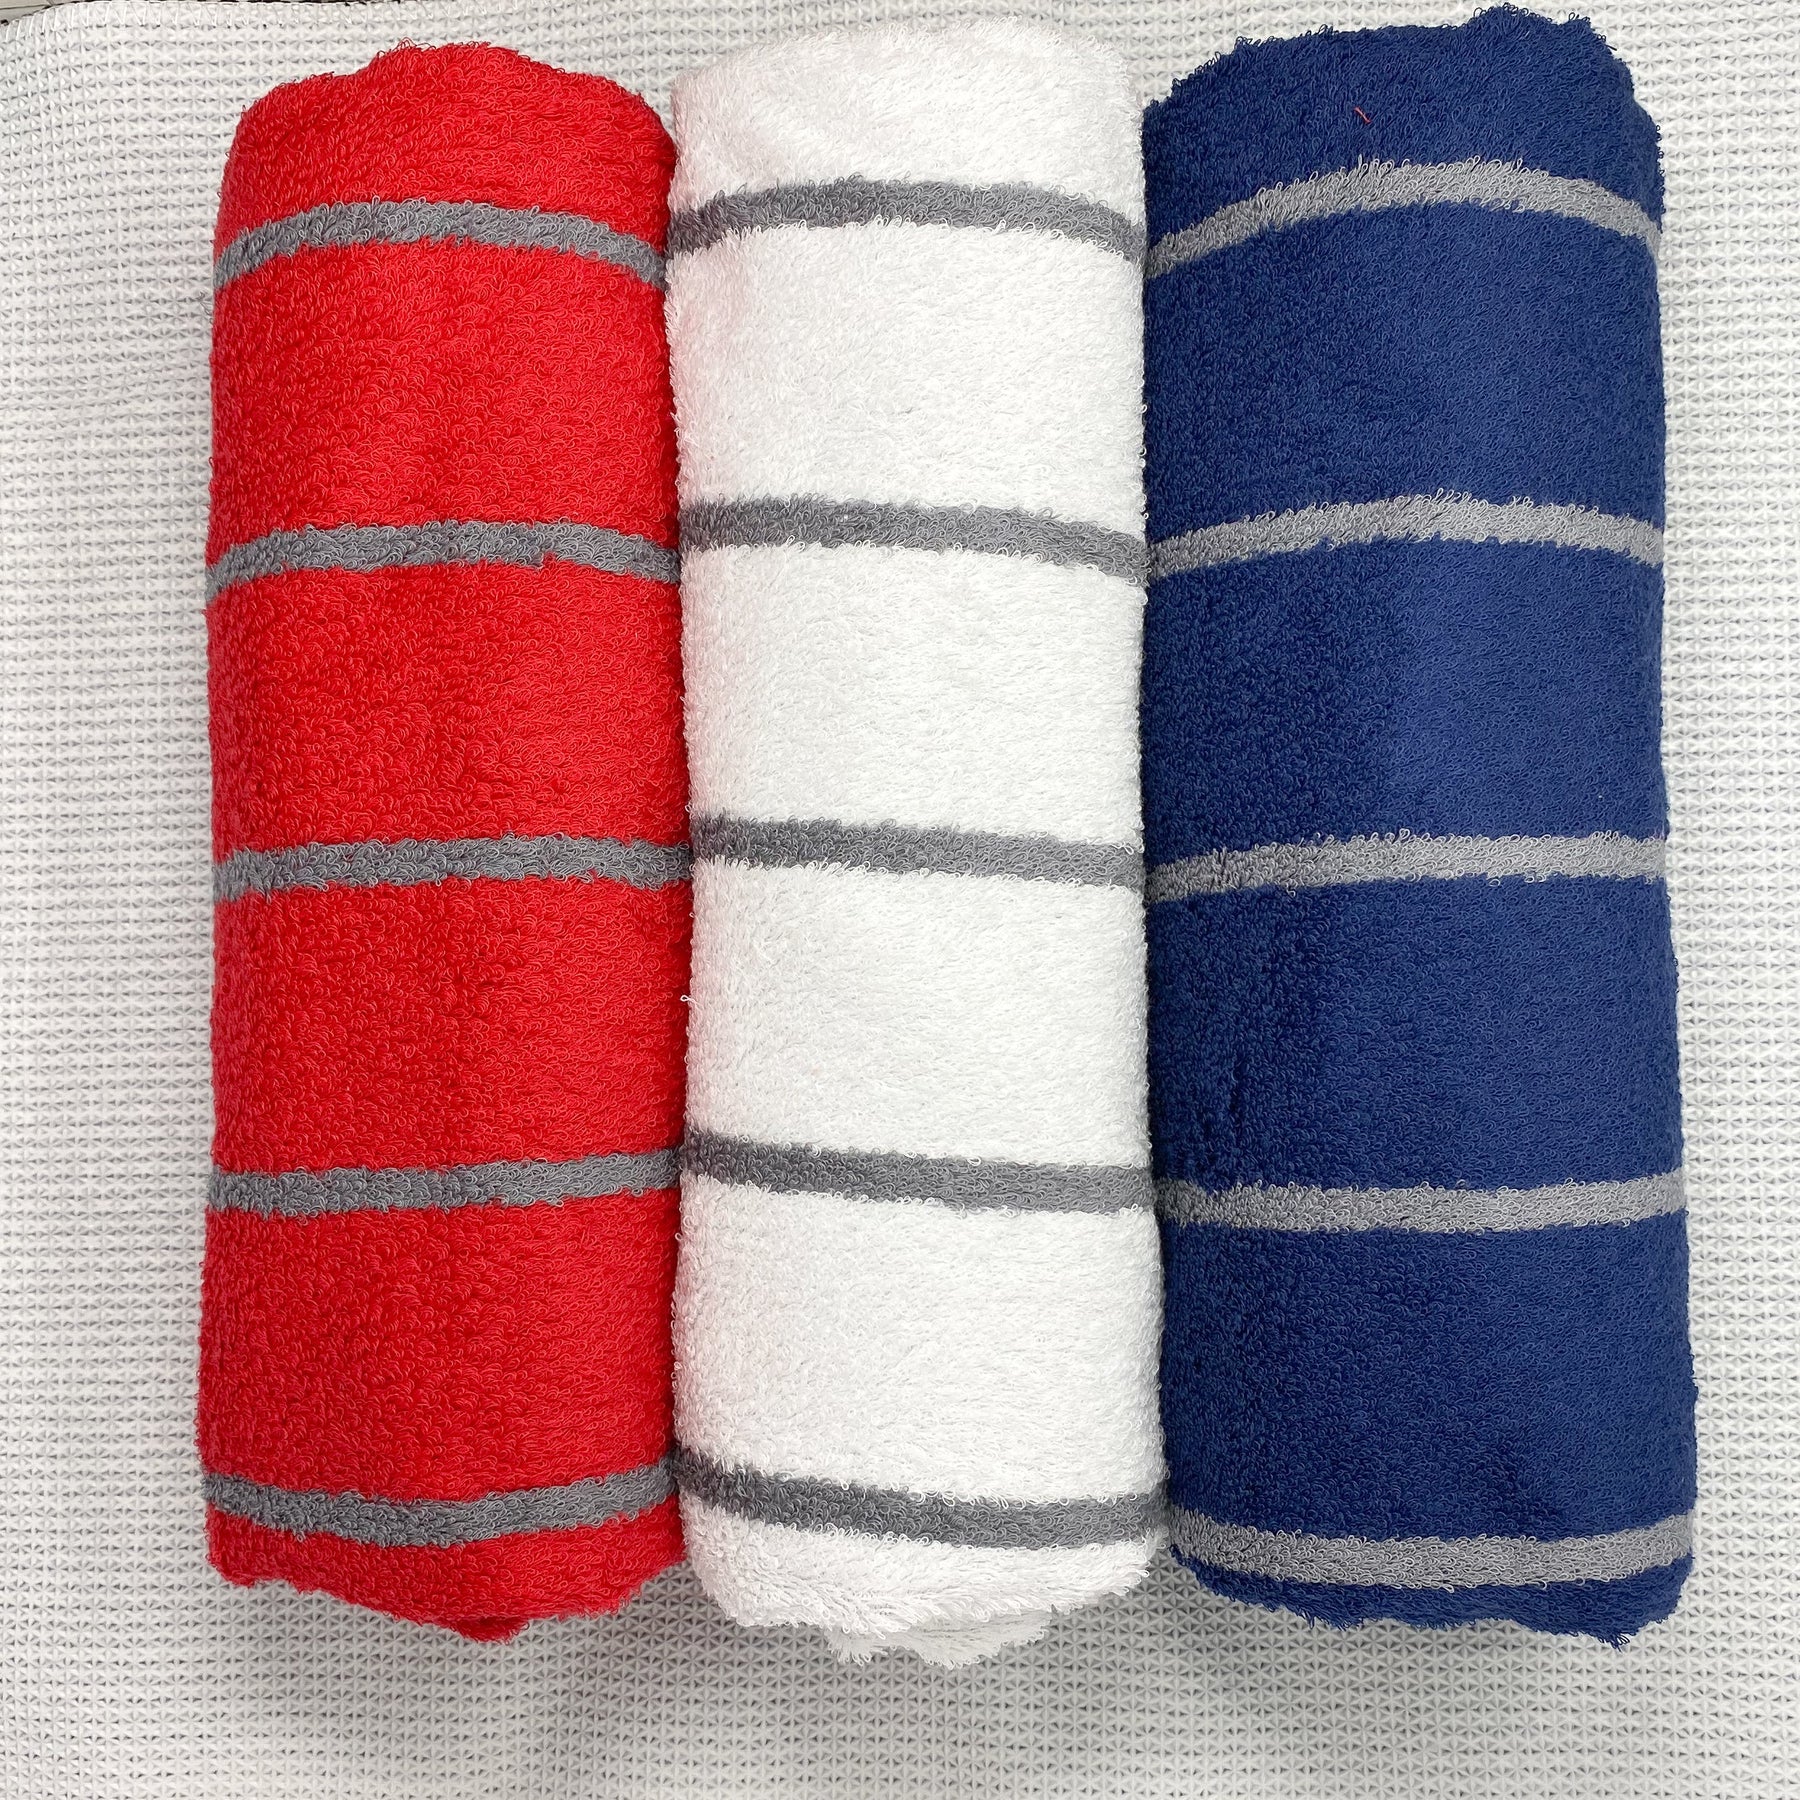 Blue, Grey and Red Super Absorbent Bath Towel (70x140) - Pack of 3